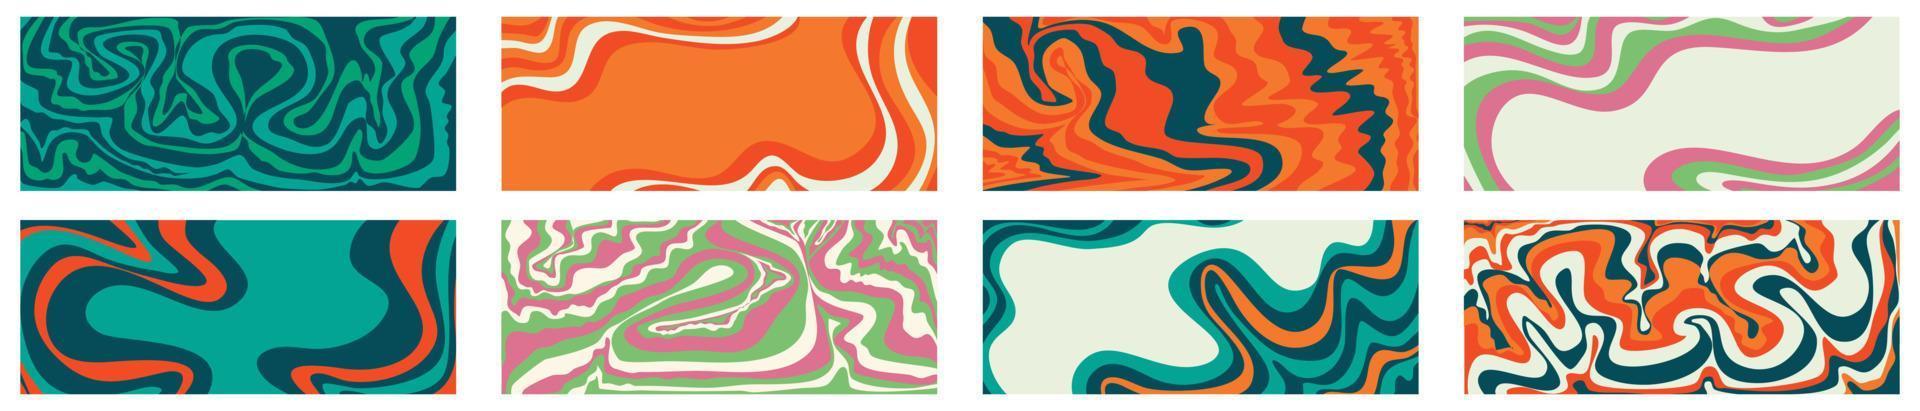 60s wave pattern in trendy style set background. Geometric swirl background. Retro 60s 70s psychedelic. Vector graphic illustration. Psychedelic print hippie